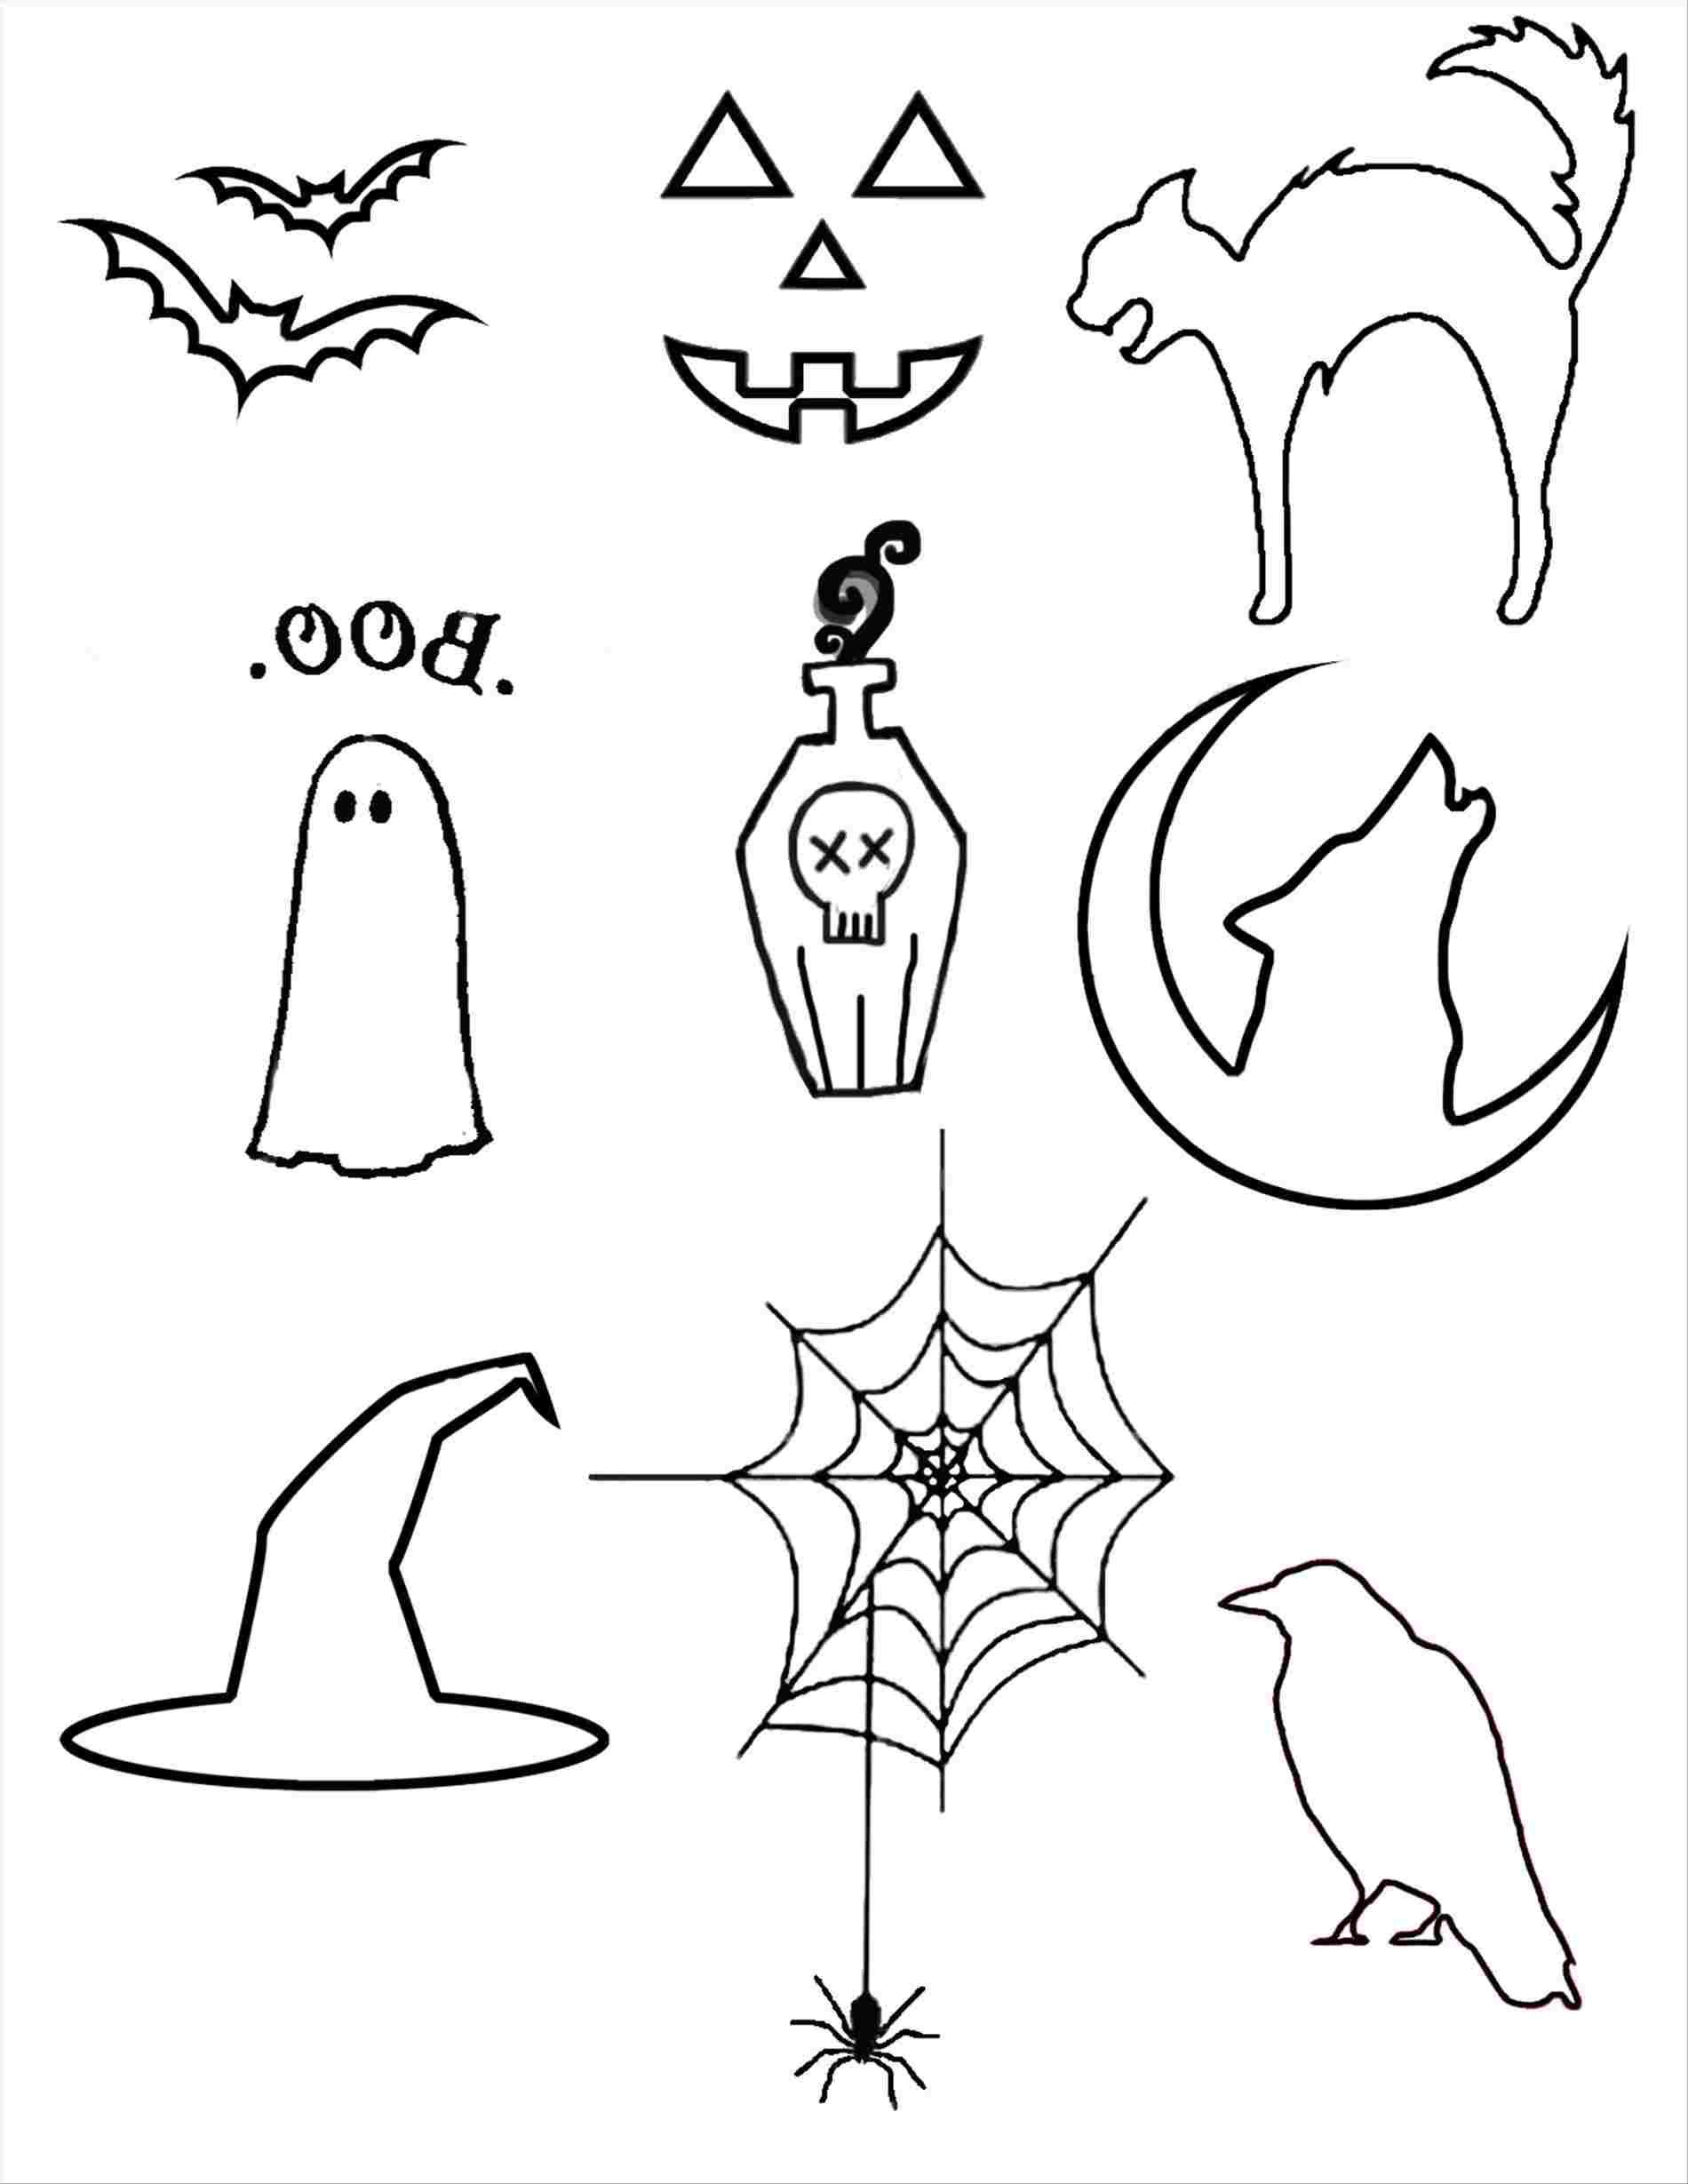 Halloween Pictures To Draw Easy - Wattnewis